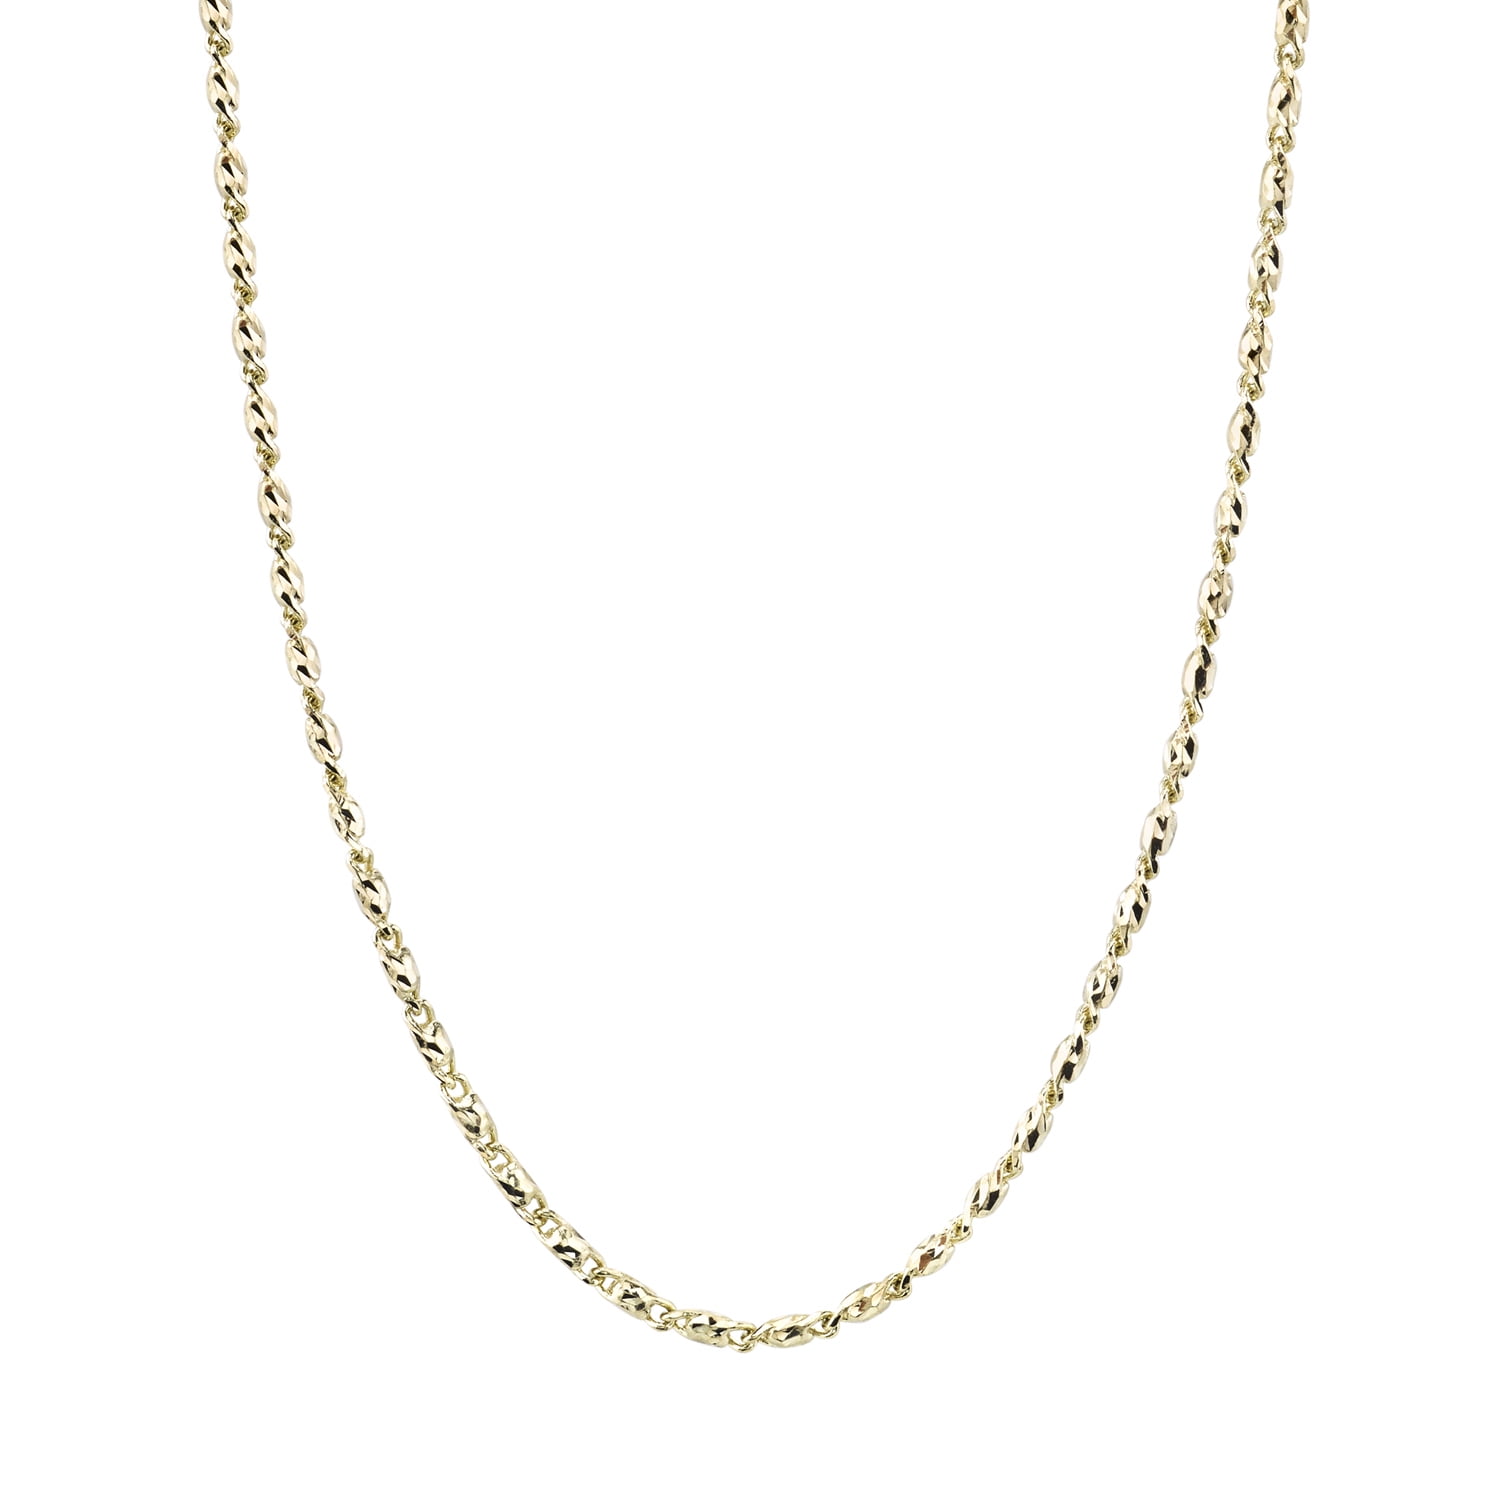 Peora 14K Yellow Gold Raso Style Chain Necklace 1.0mm 16 20 inches 18